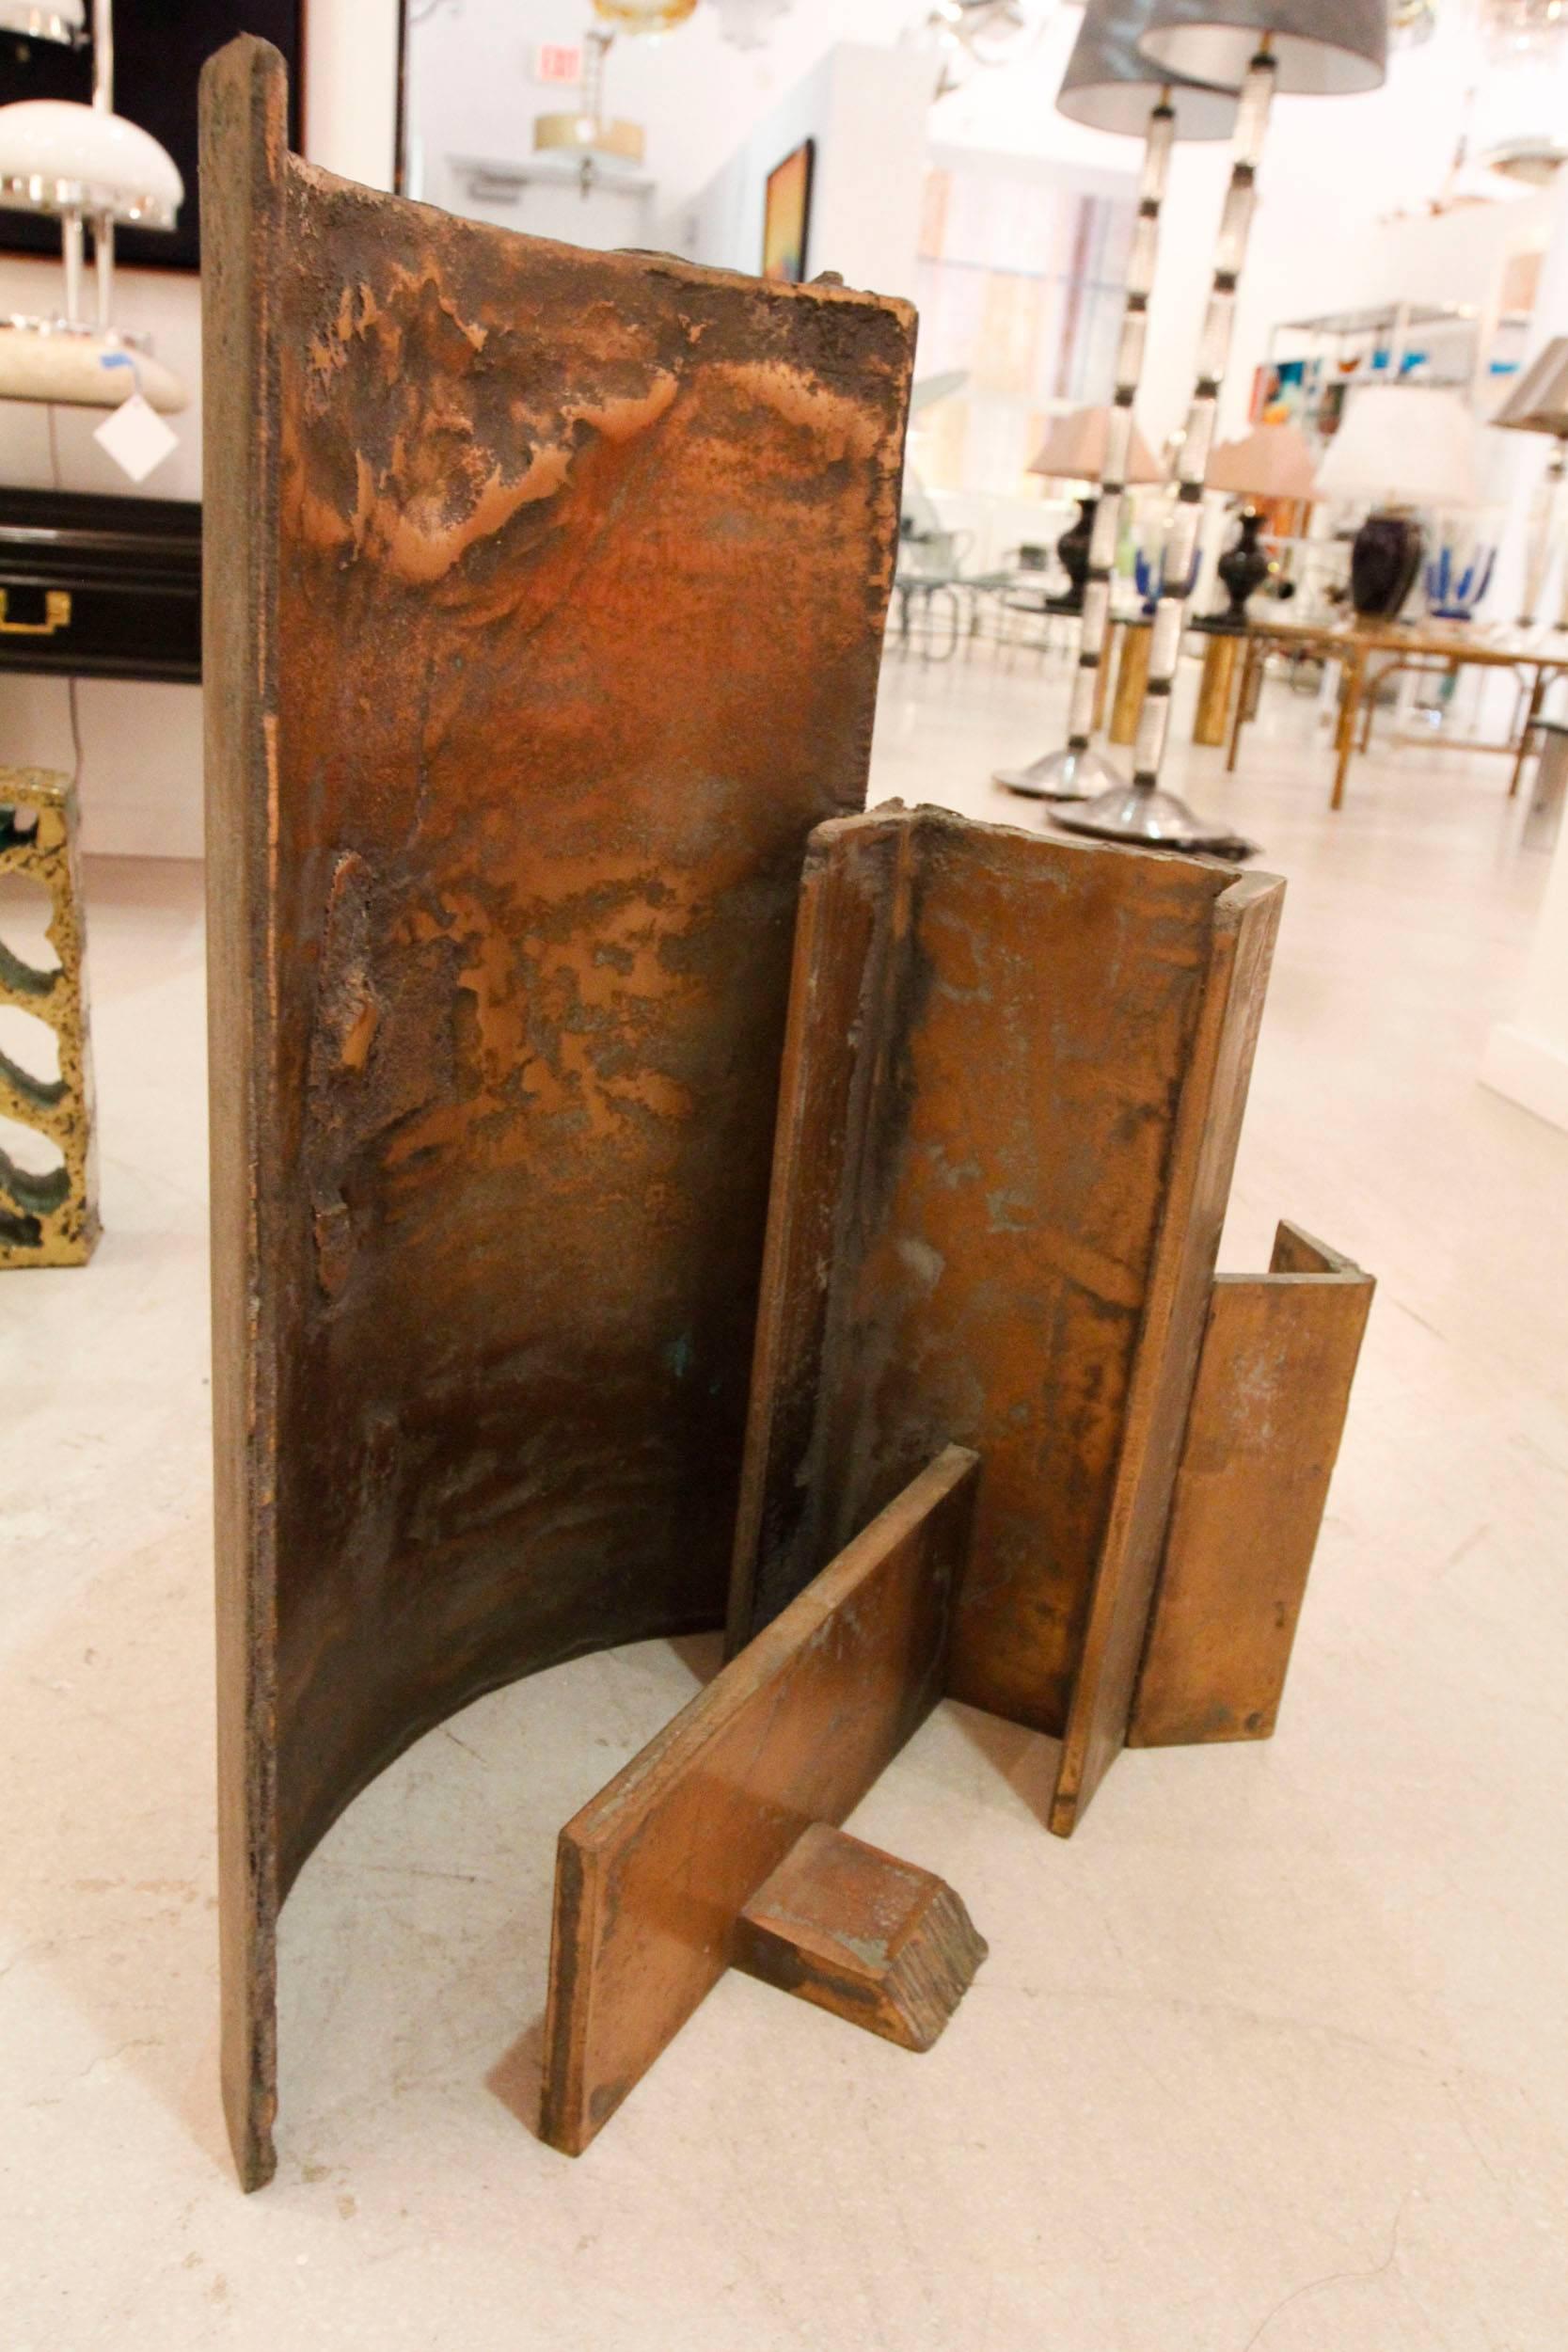 Bronze modernist sculpture by Alexander Liberman -- heavy and geometric and attractive from all angles. The sculpture is dated 1973. Provenance see Piasa Auction Paris 4-27-2016.